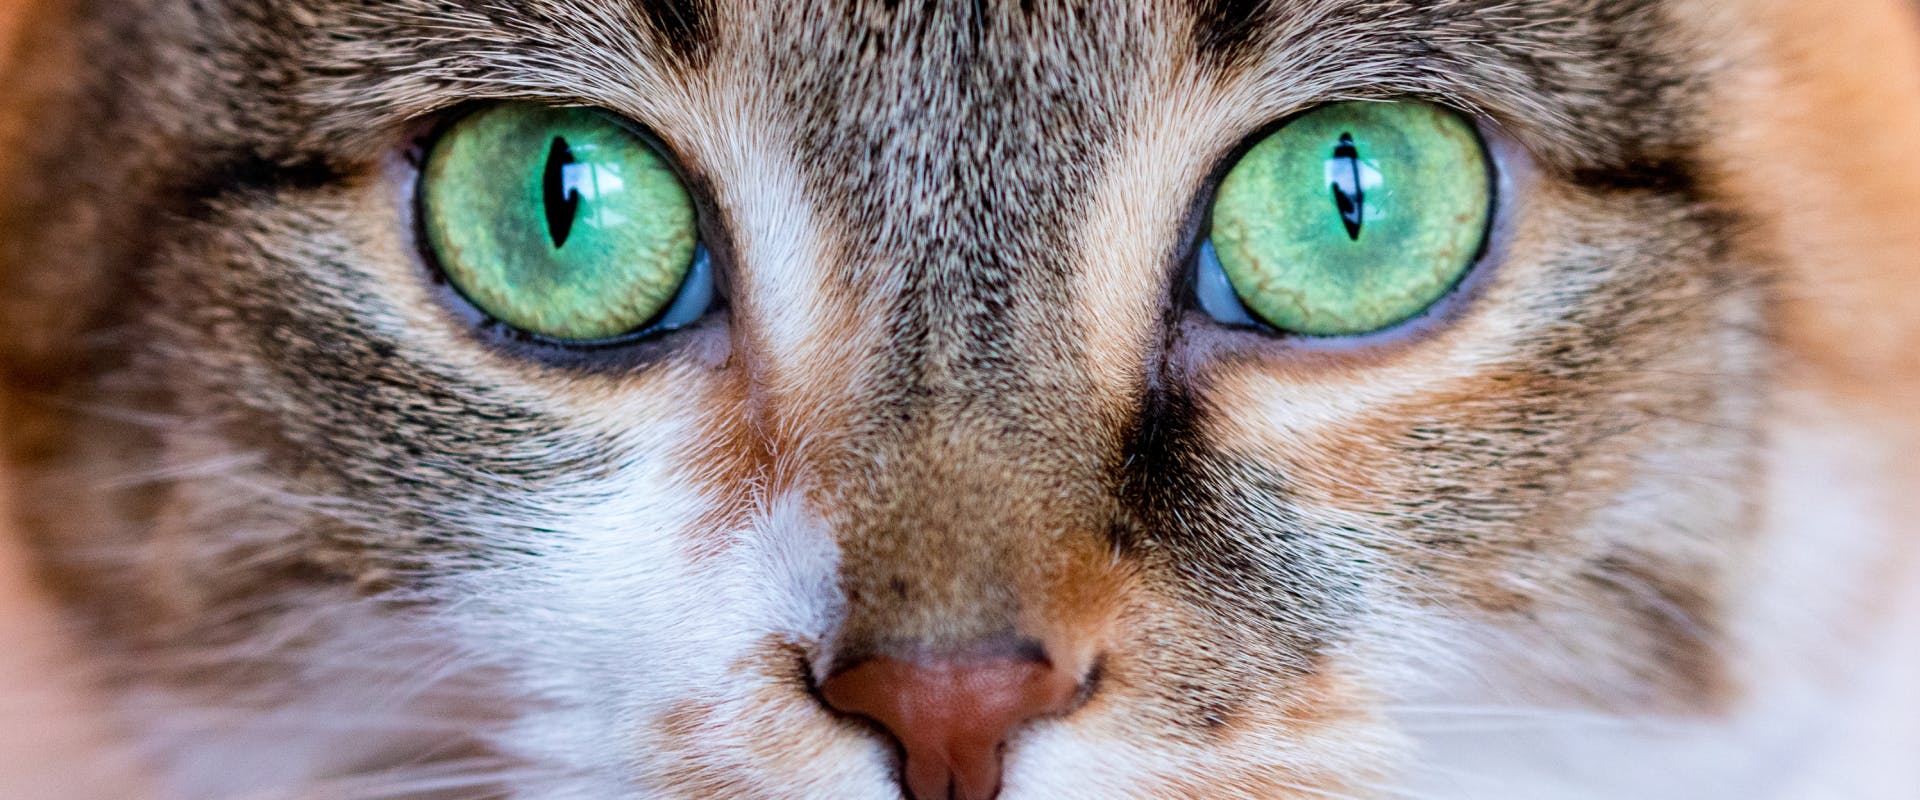 a white and brown tabby cat's face directly in front of the camera with large bright green eyes and no cat eye discharge